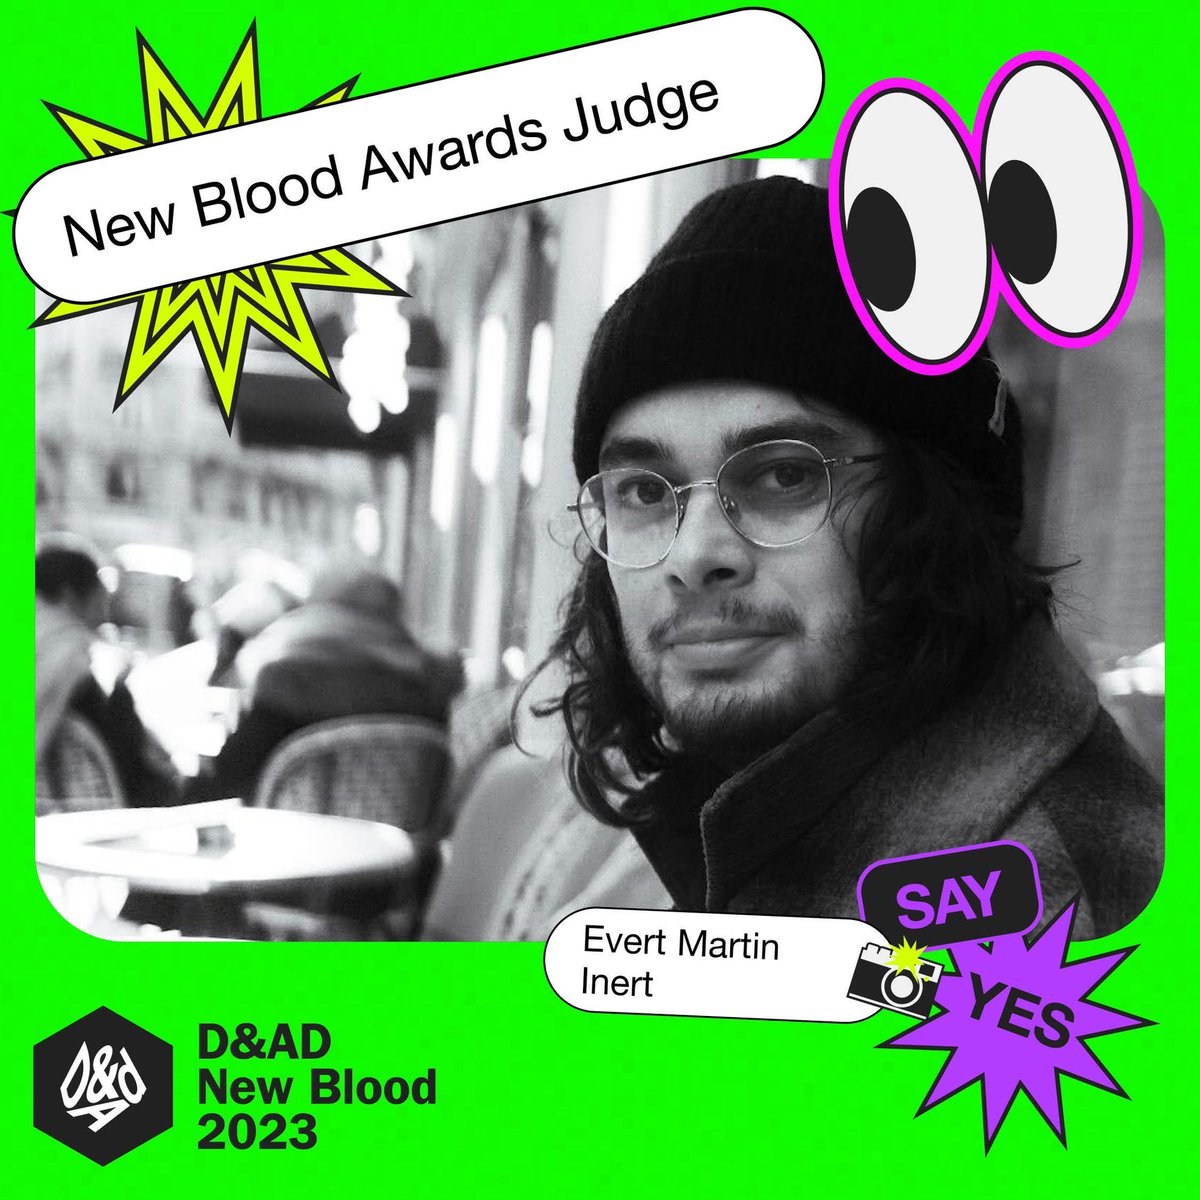 I am proud to announce that I will be judging the Barclays brief for @DandADNewBlood Awards 2023!
I am passionately looking forward experiencing the insights and ideas from a new generation of creative talent. #newbloodawards #dandad #designawards